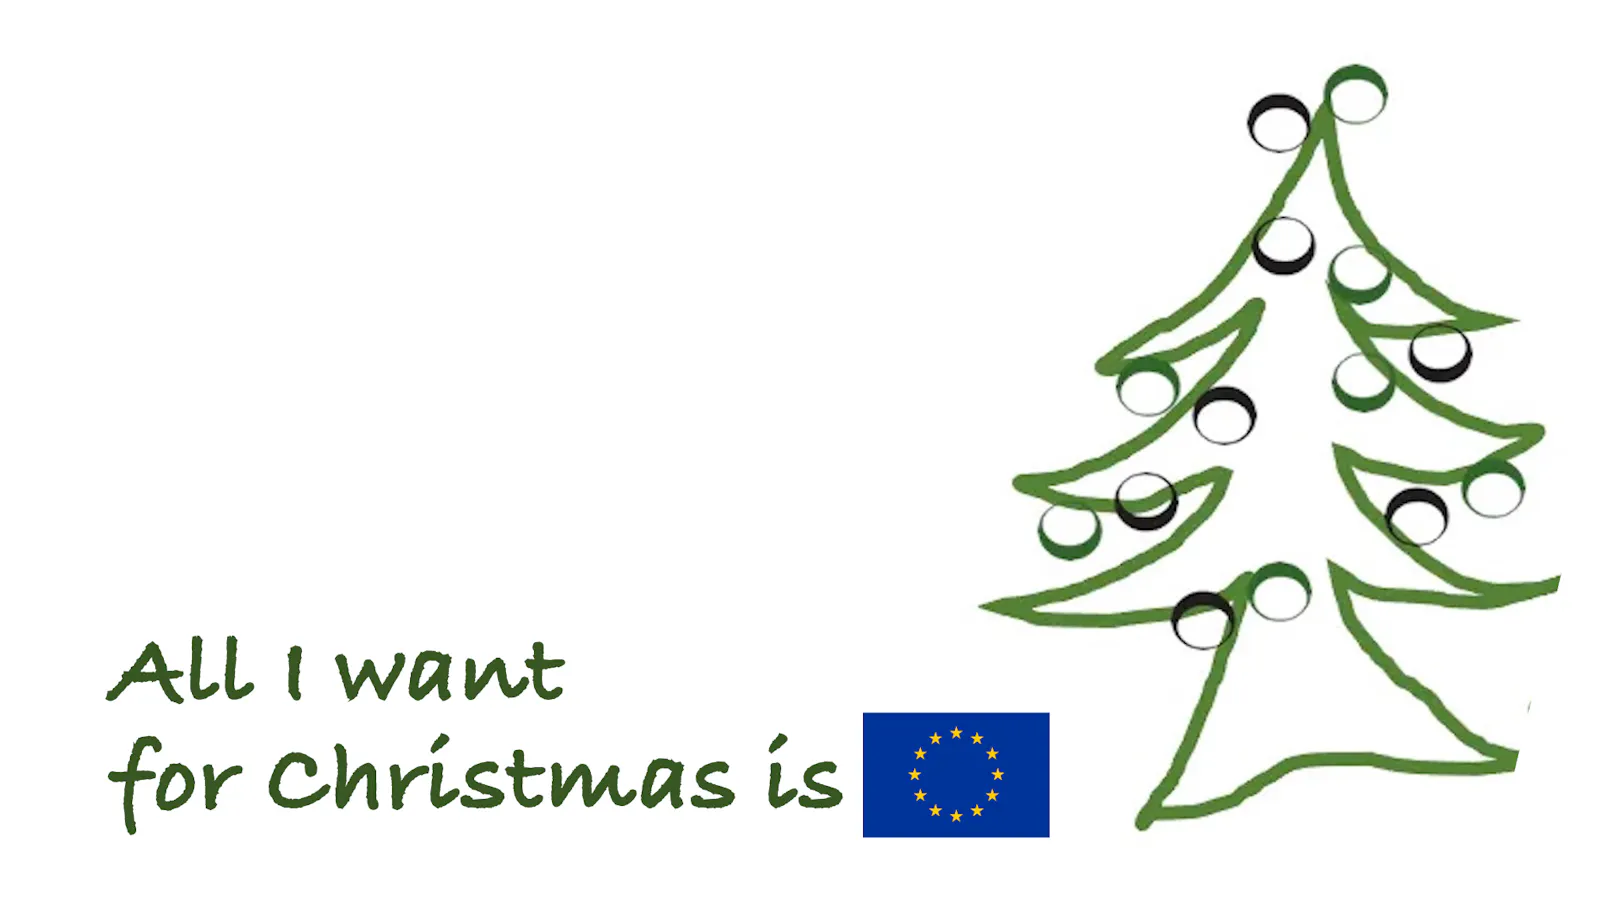 All I want for Christmas is EU